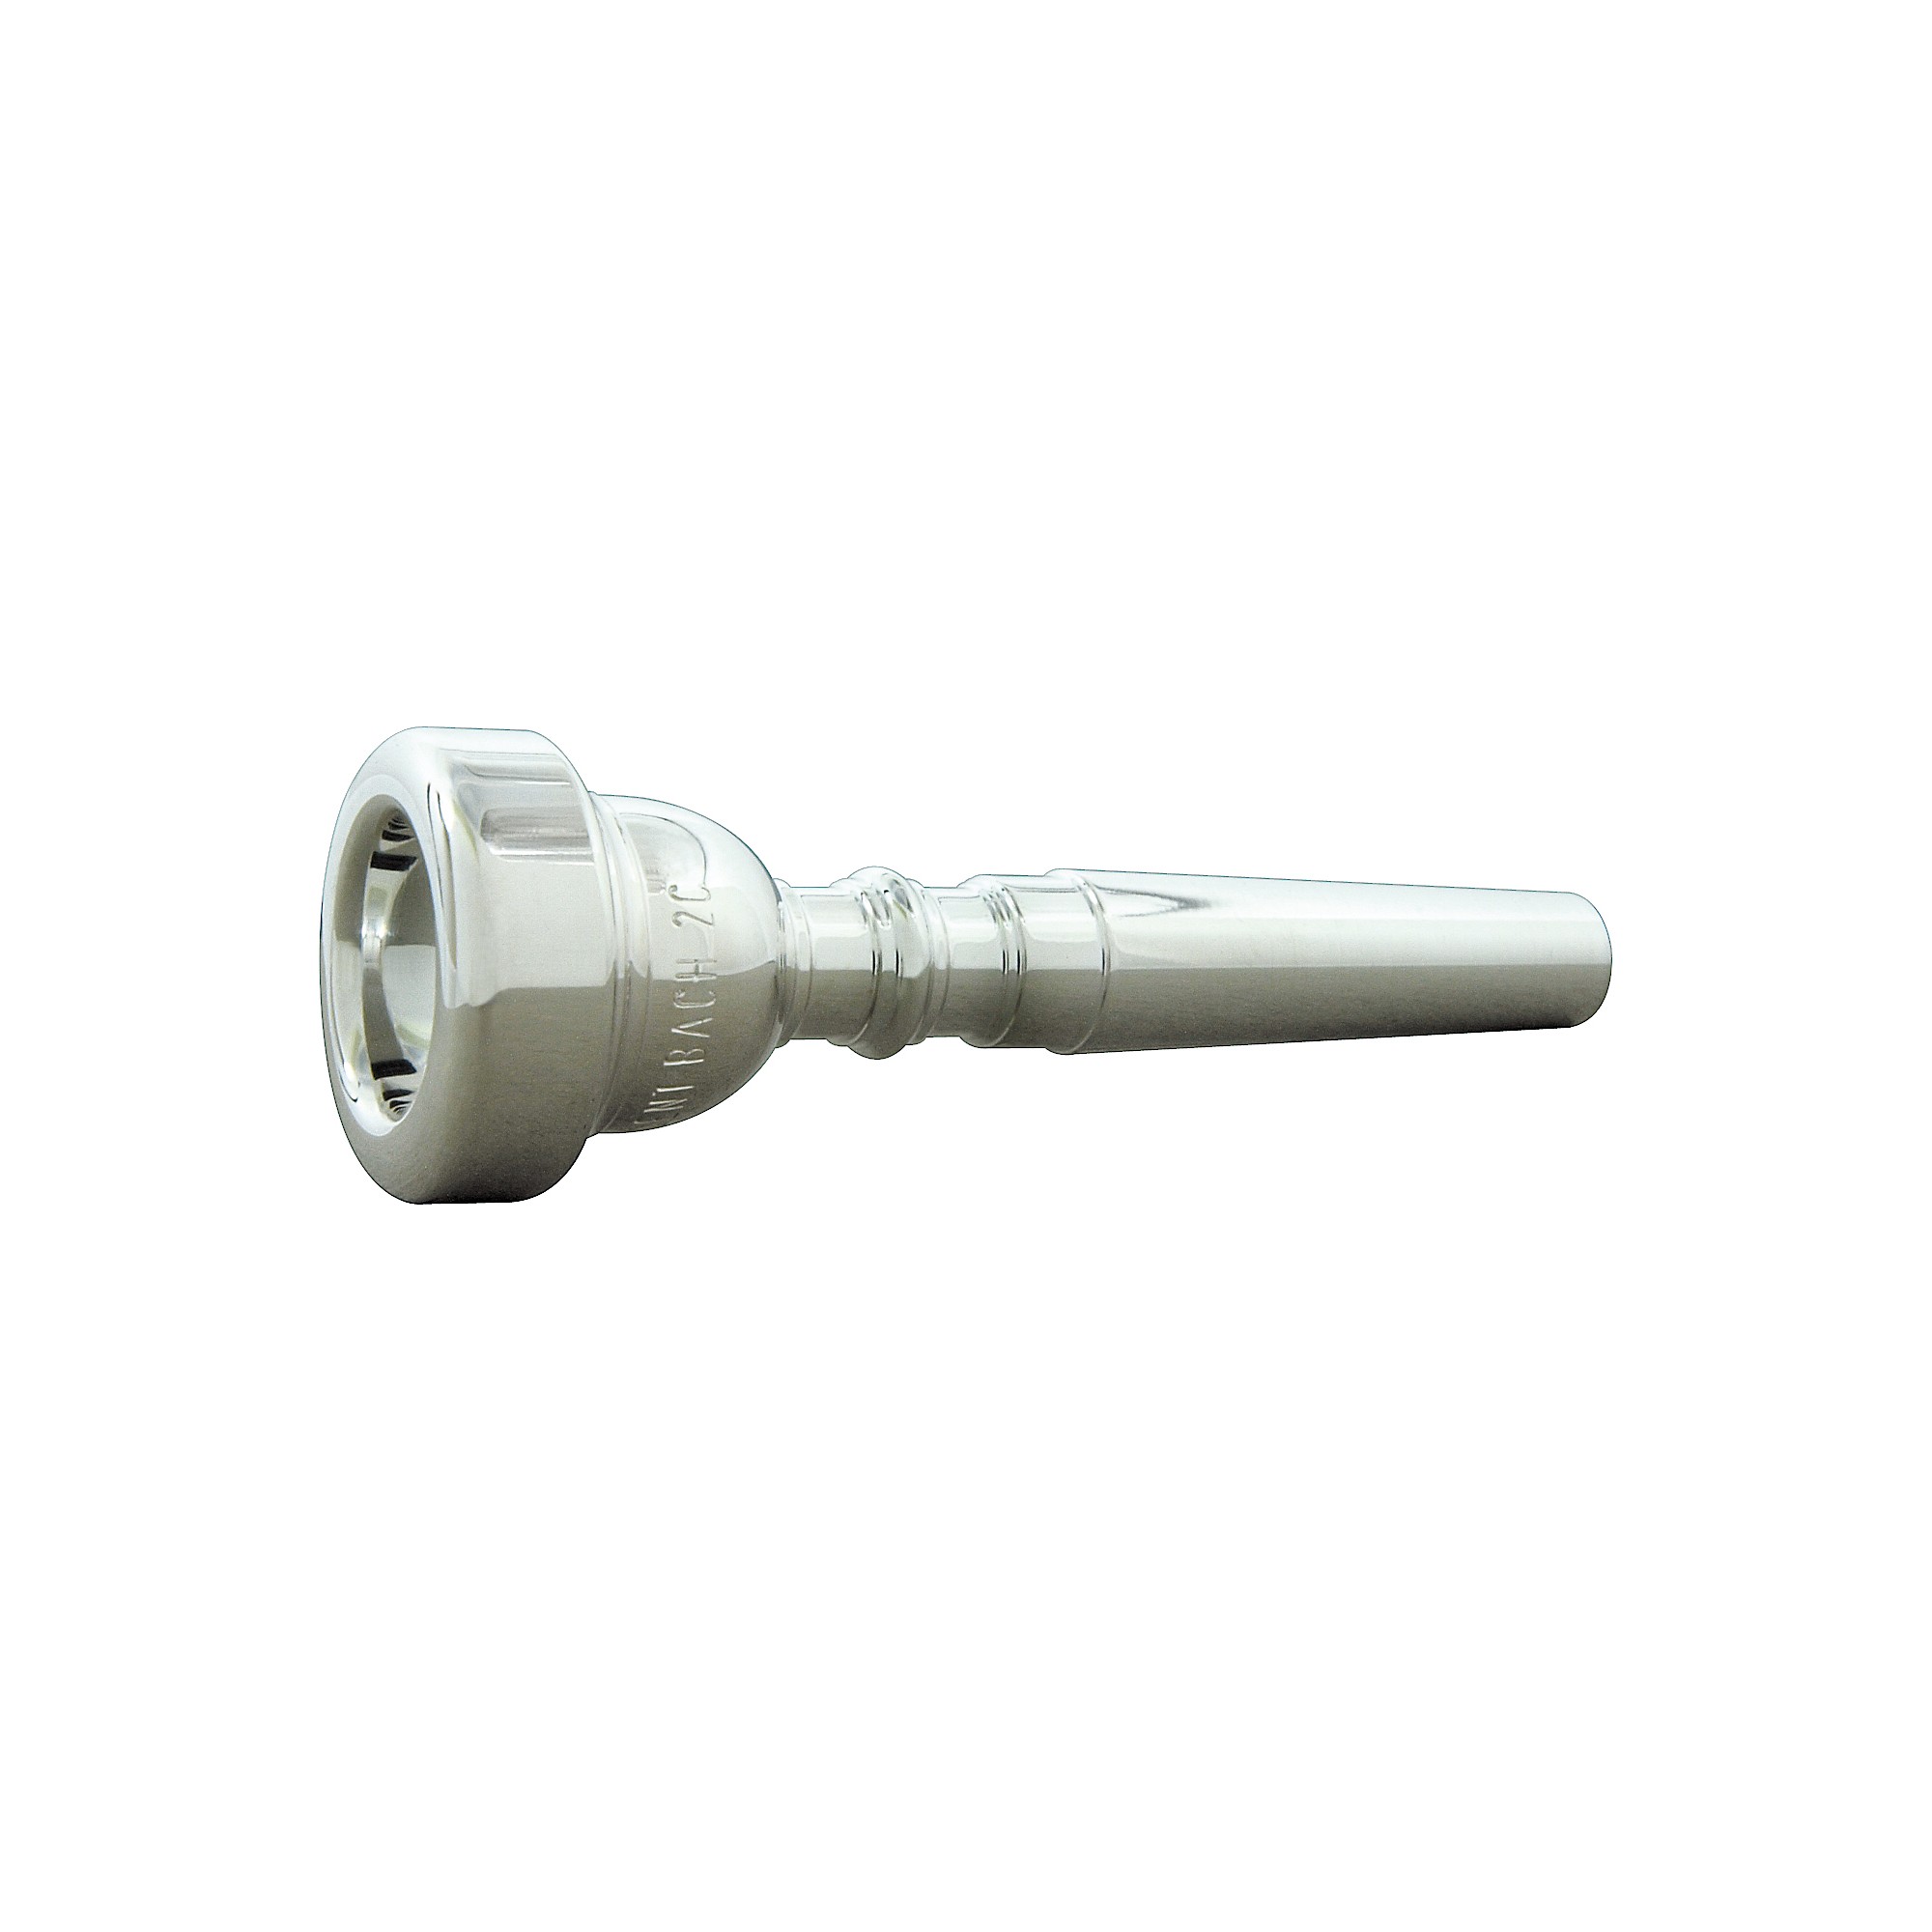 Bach Standard Series Trumpet Mouthpiece in Silver